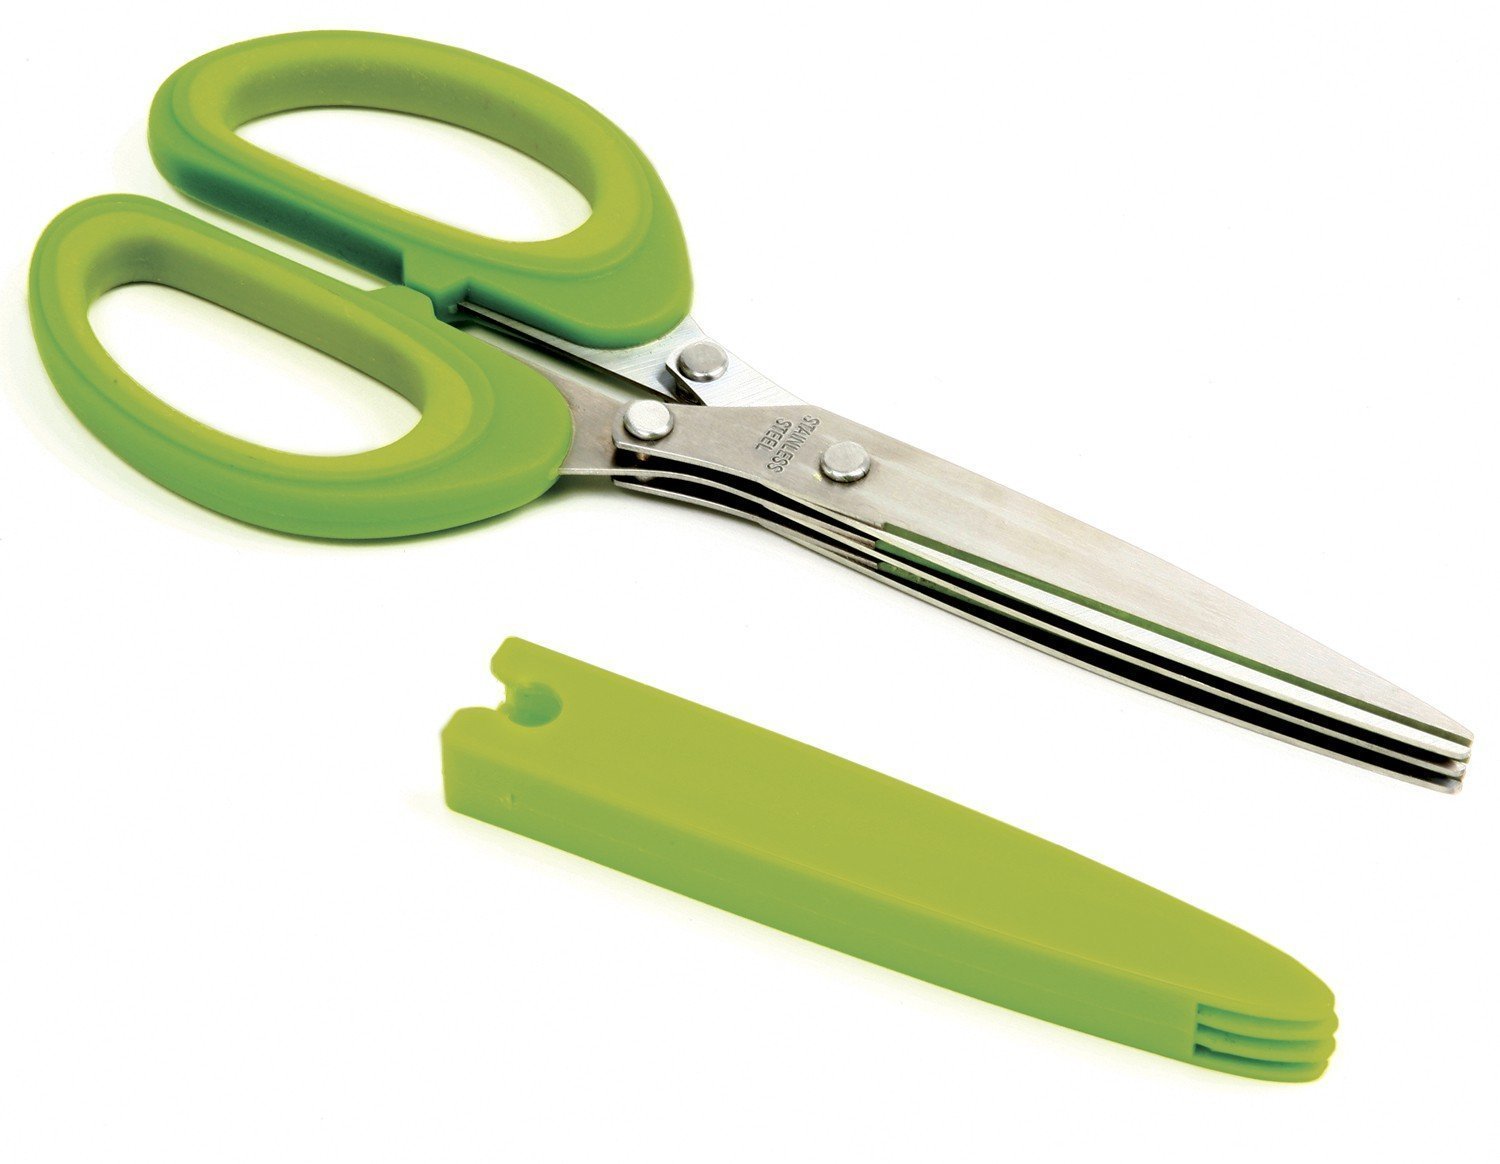 Norpro Multi Blade Herb Scissors with Blade Cleaner, 8-inch, Green  - Like New